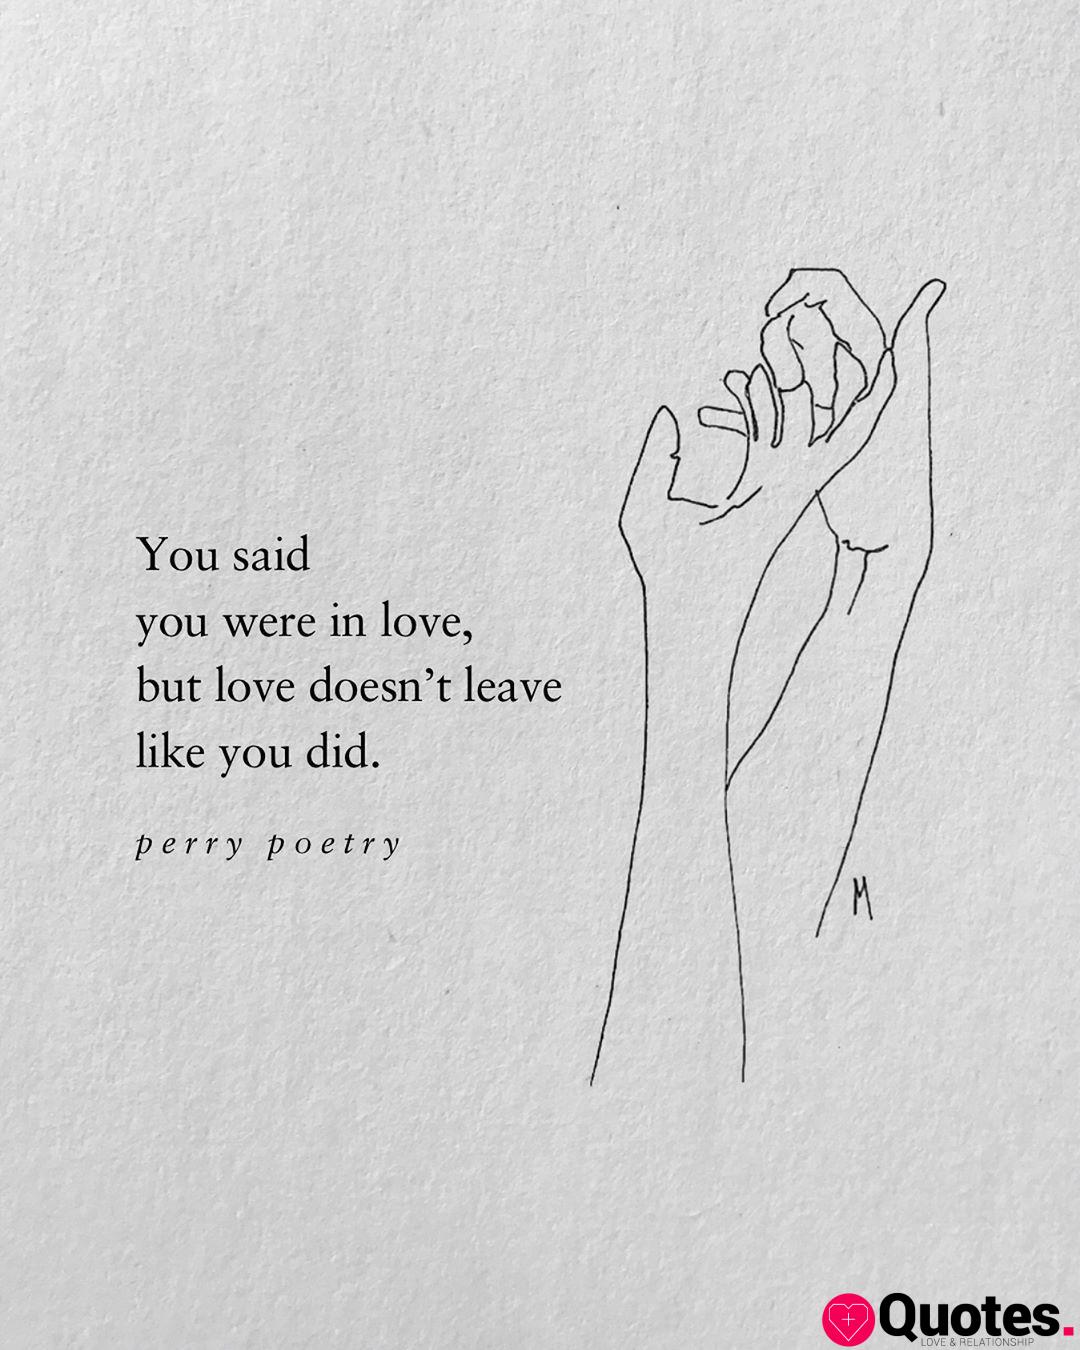 Perry Poetry on Instagram: “How many times have you had your heart broken? 💔 Words by @perrypoetry art by @_sara.miller_”